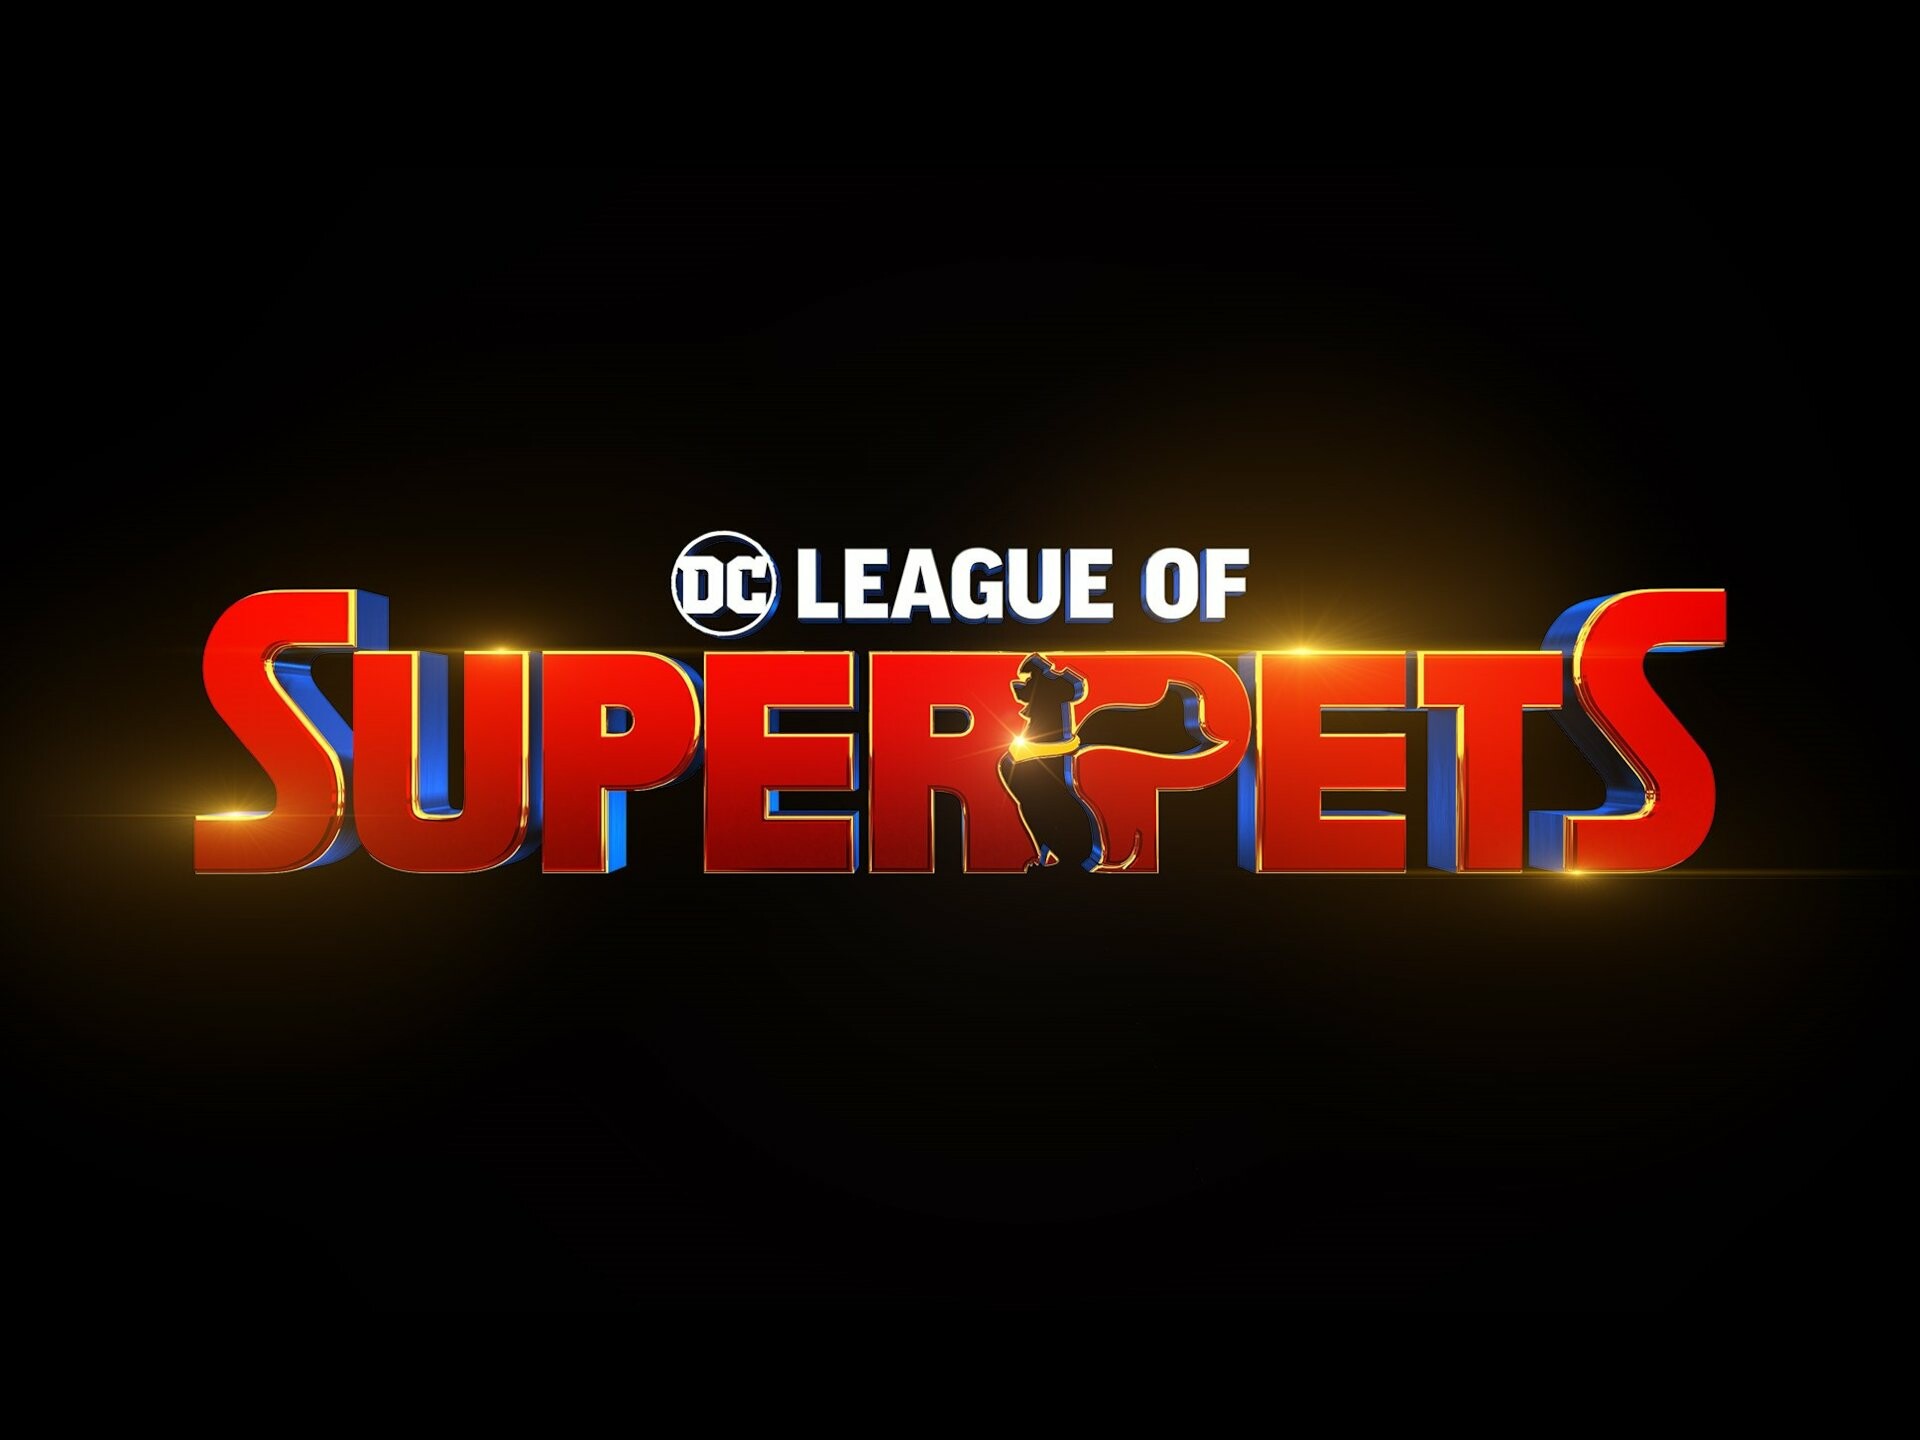 DC League of Super-Pets: Produced by Warner Animation Group, DC Entertainment, and Seven Bucks Productions. 1920x1440 HD Wallpaper.